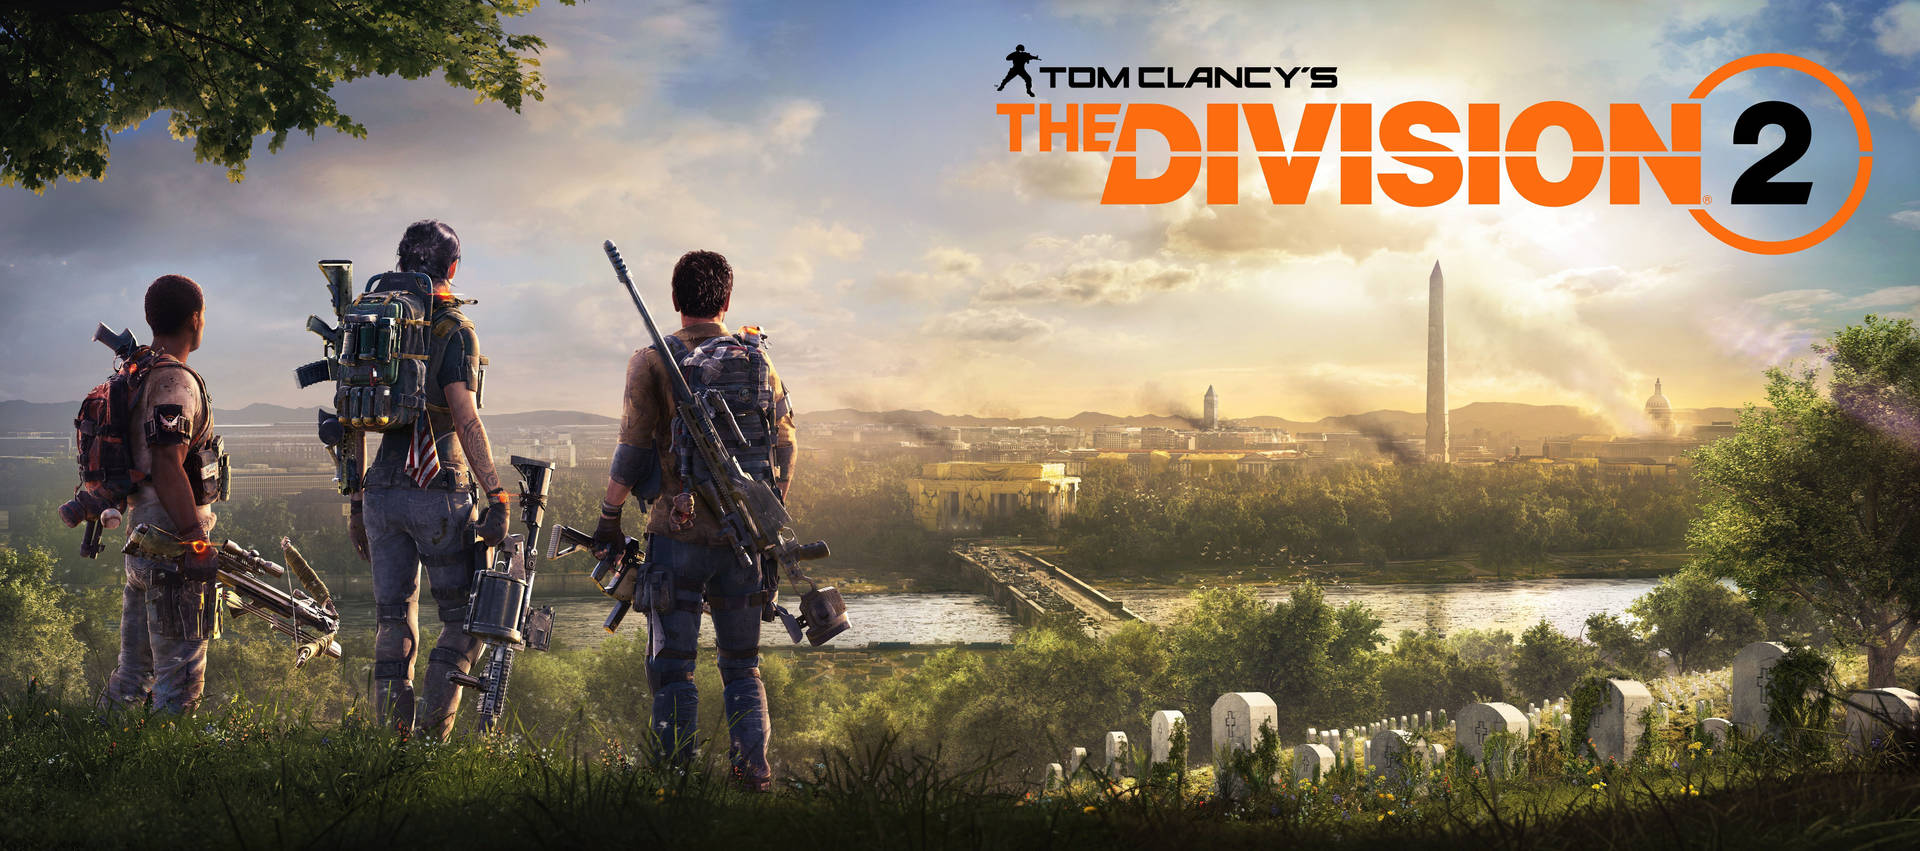 The Division 2 Sunset Doomed City